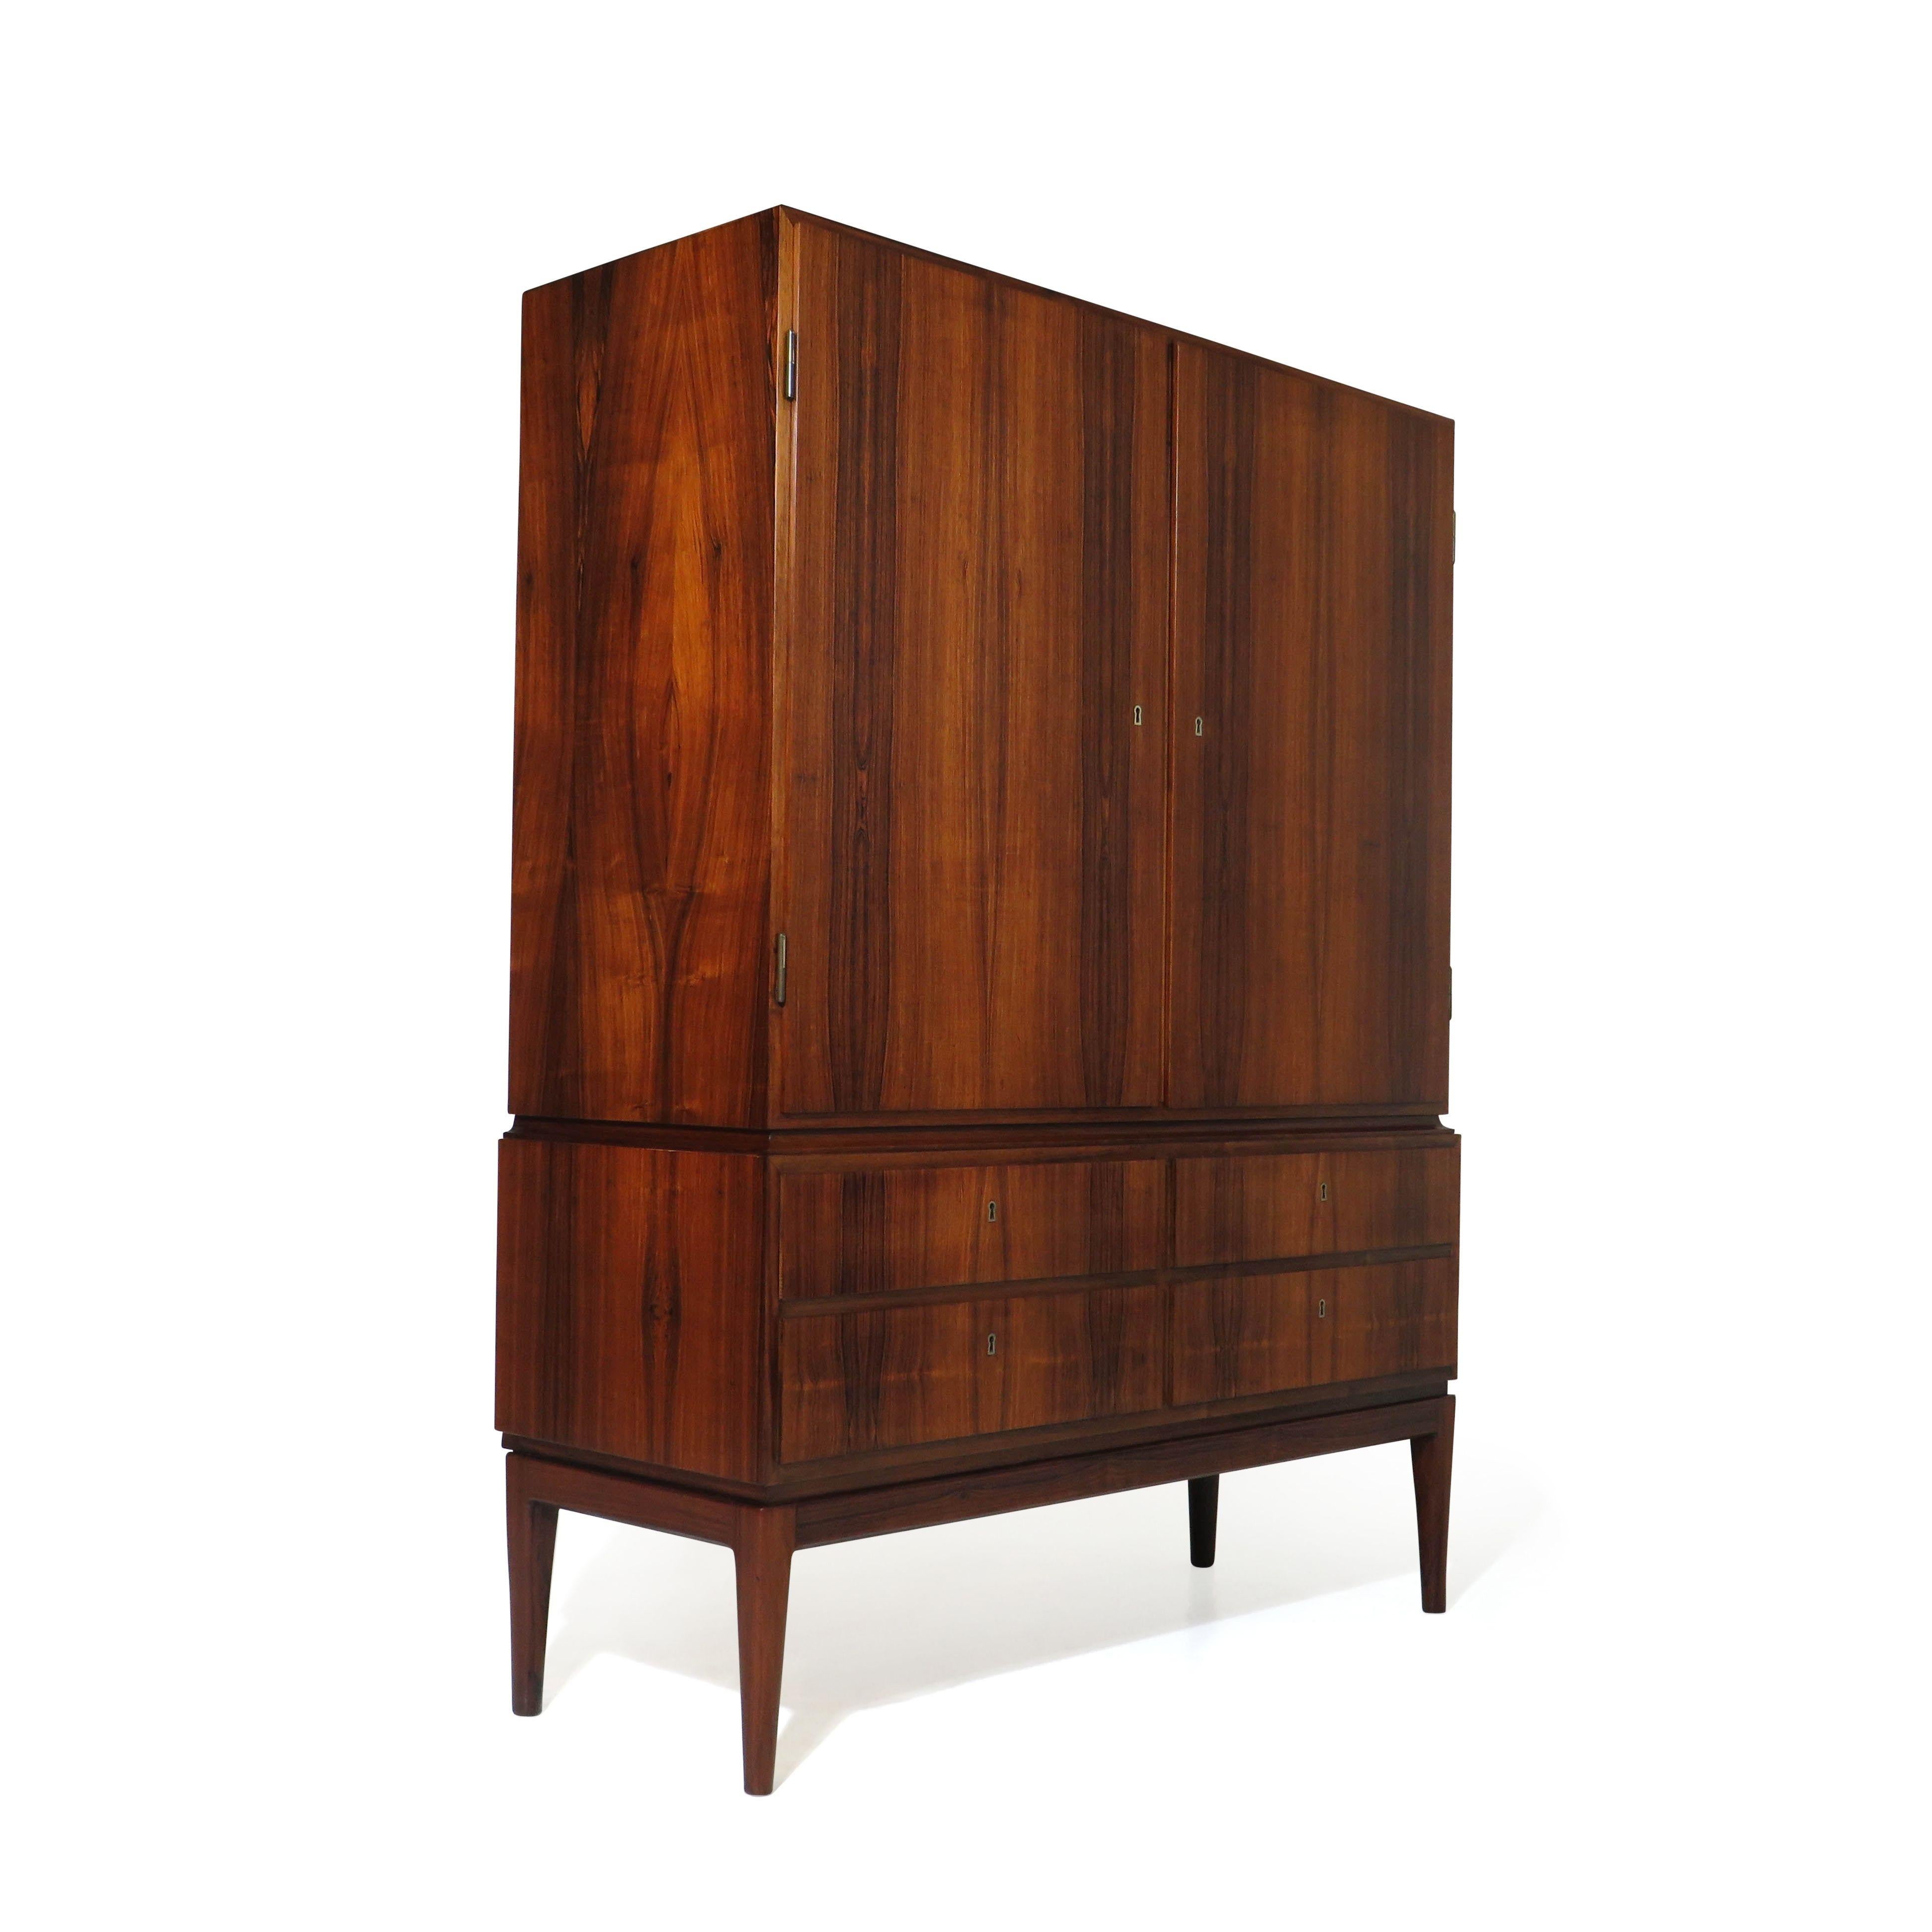 Brazilian Rosewood sideboard cabinet, circa 1948, Denmark, with book-matched rosewood grain on two locking doors which open to reveal an interior of Cuban mahogany with adjustable shelves and three silverware or jewelry drawers, above four locking